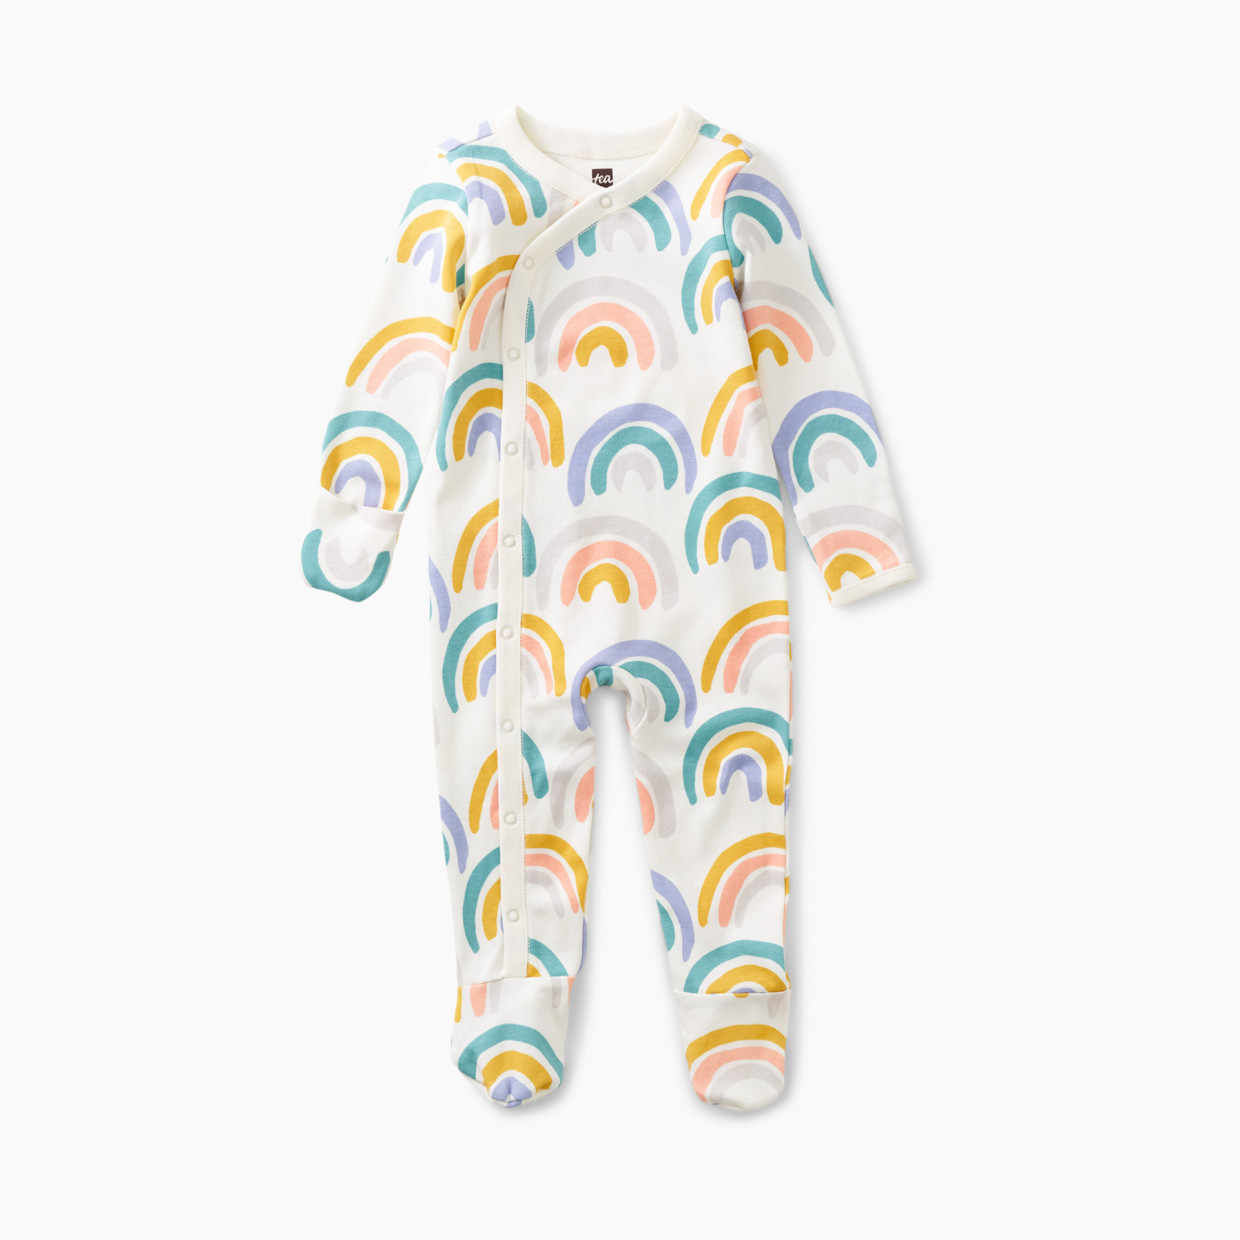 Tea Collection Footed Romper - Painted Rainbow, 0-3 Months.